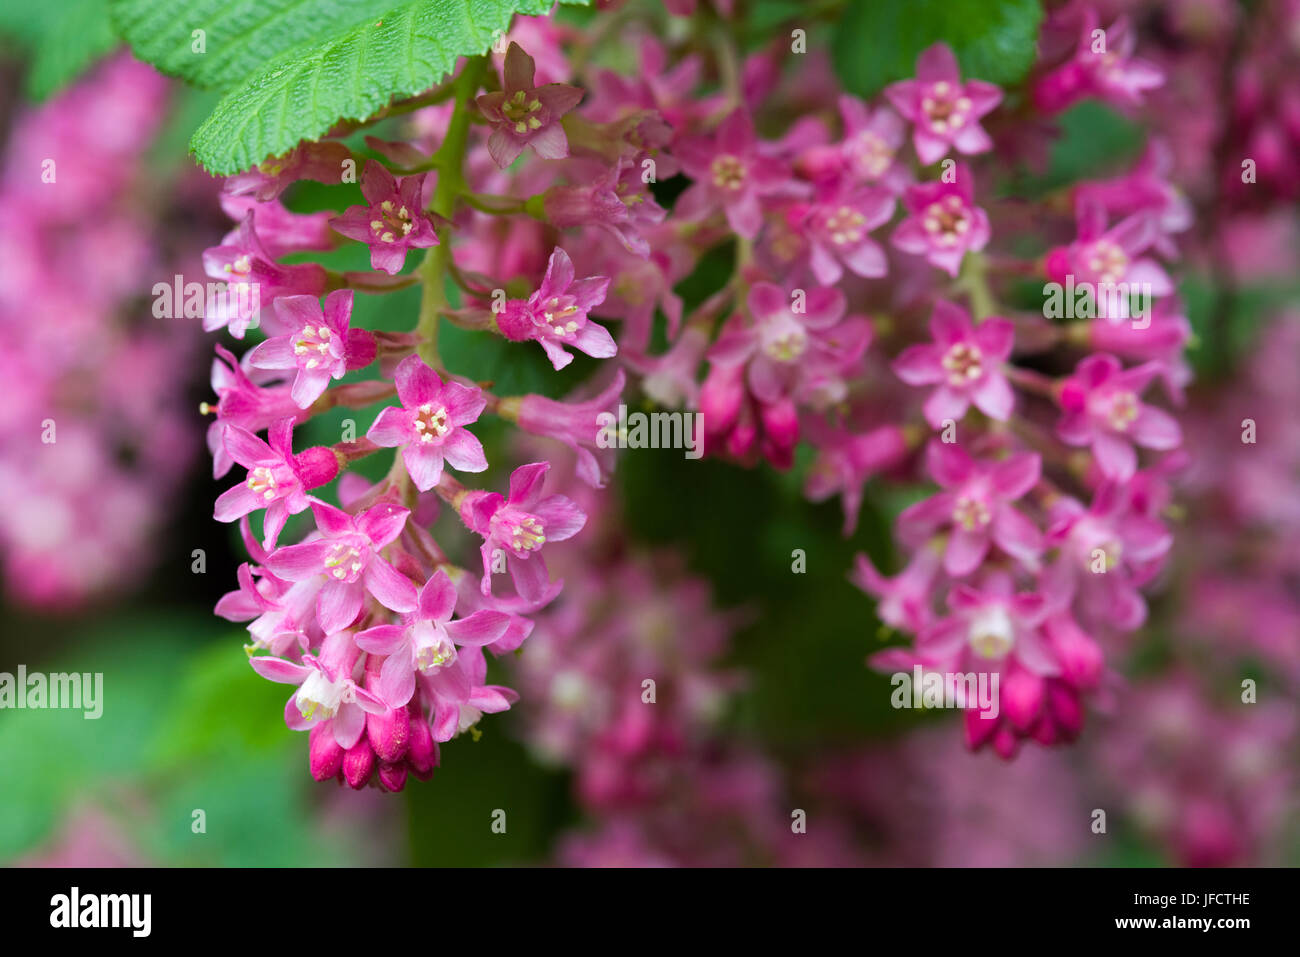 The spring flowers of a Ribes sanguineum 'Pulborough Scarlet' cultivar in a British garden. Stock Photo